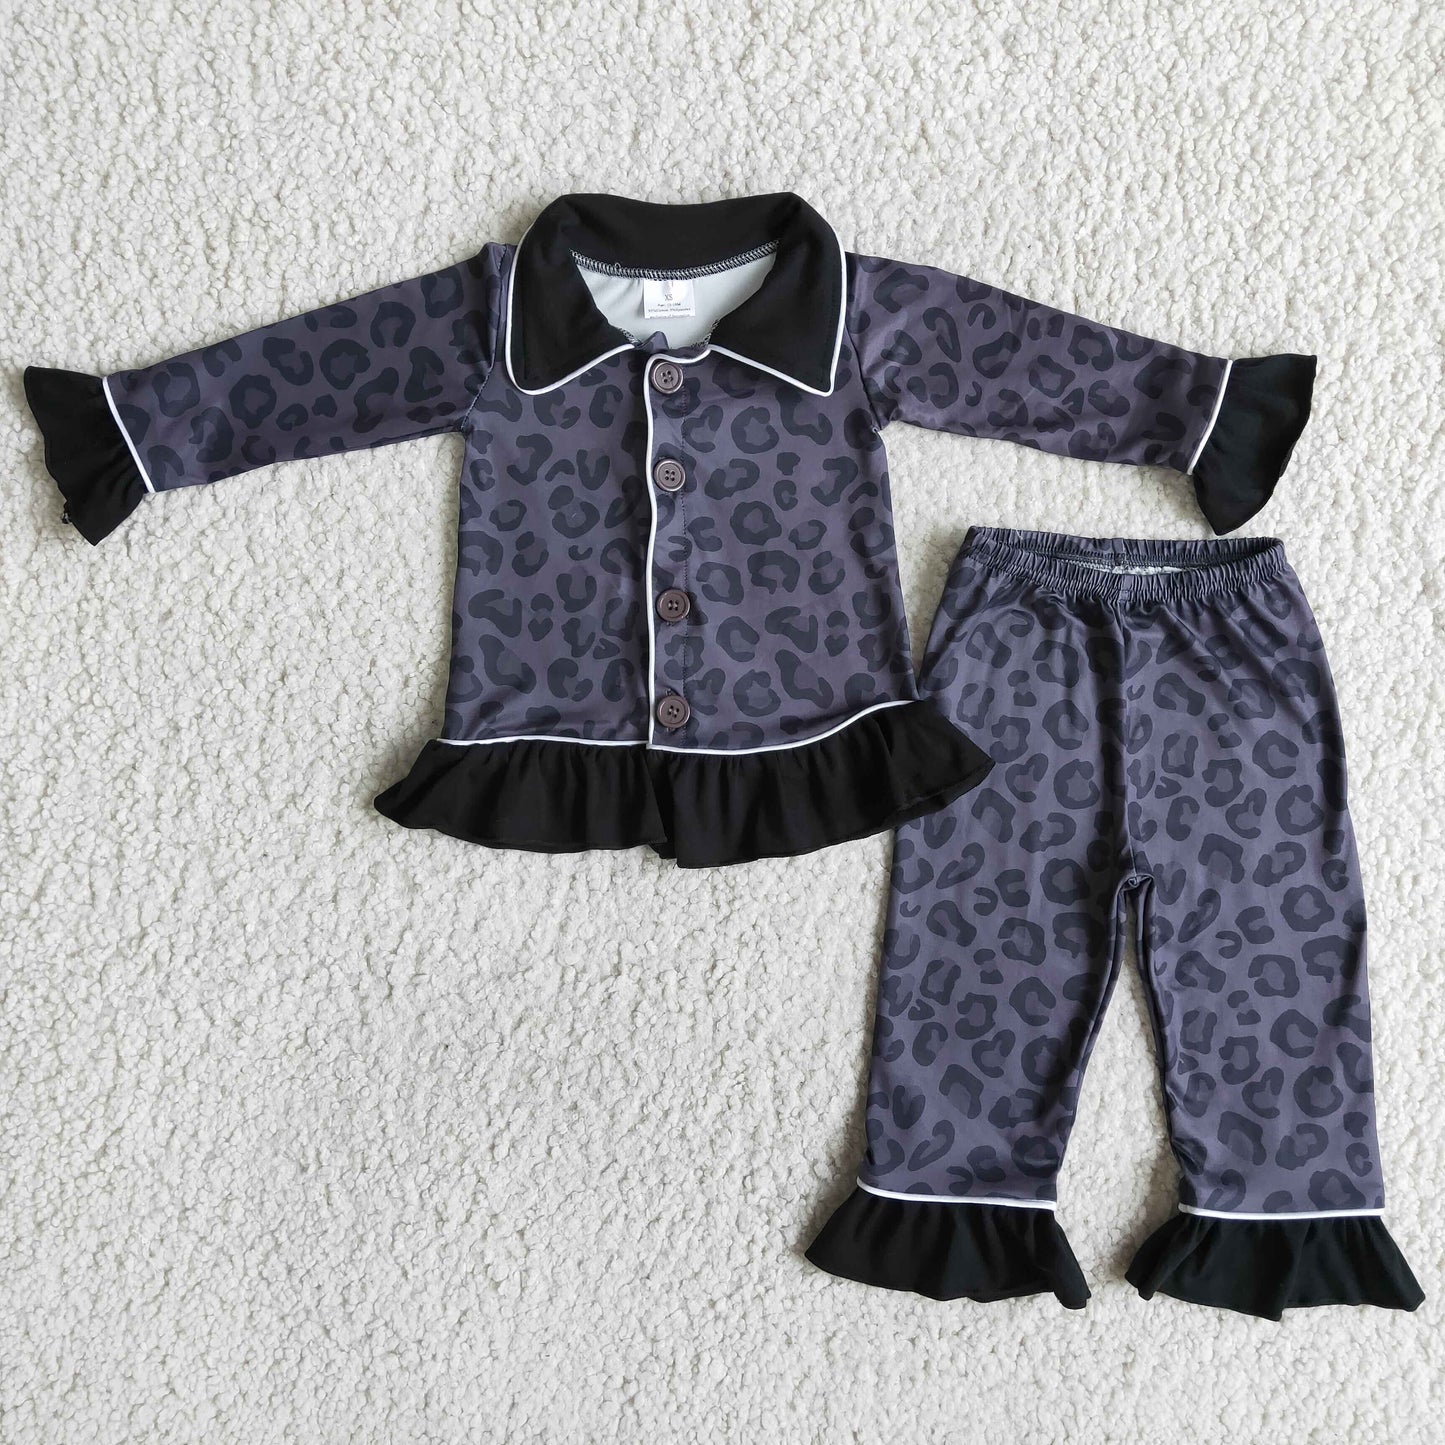 leopard ruffle pajamas outfit girl